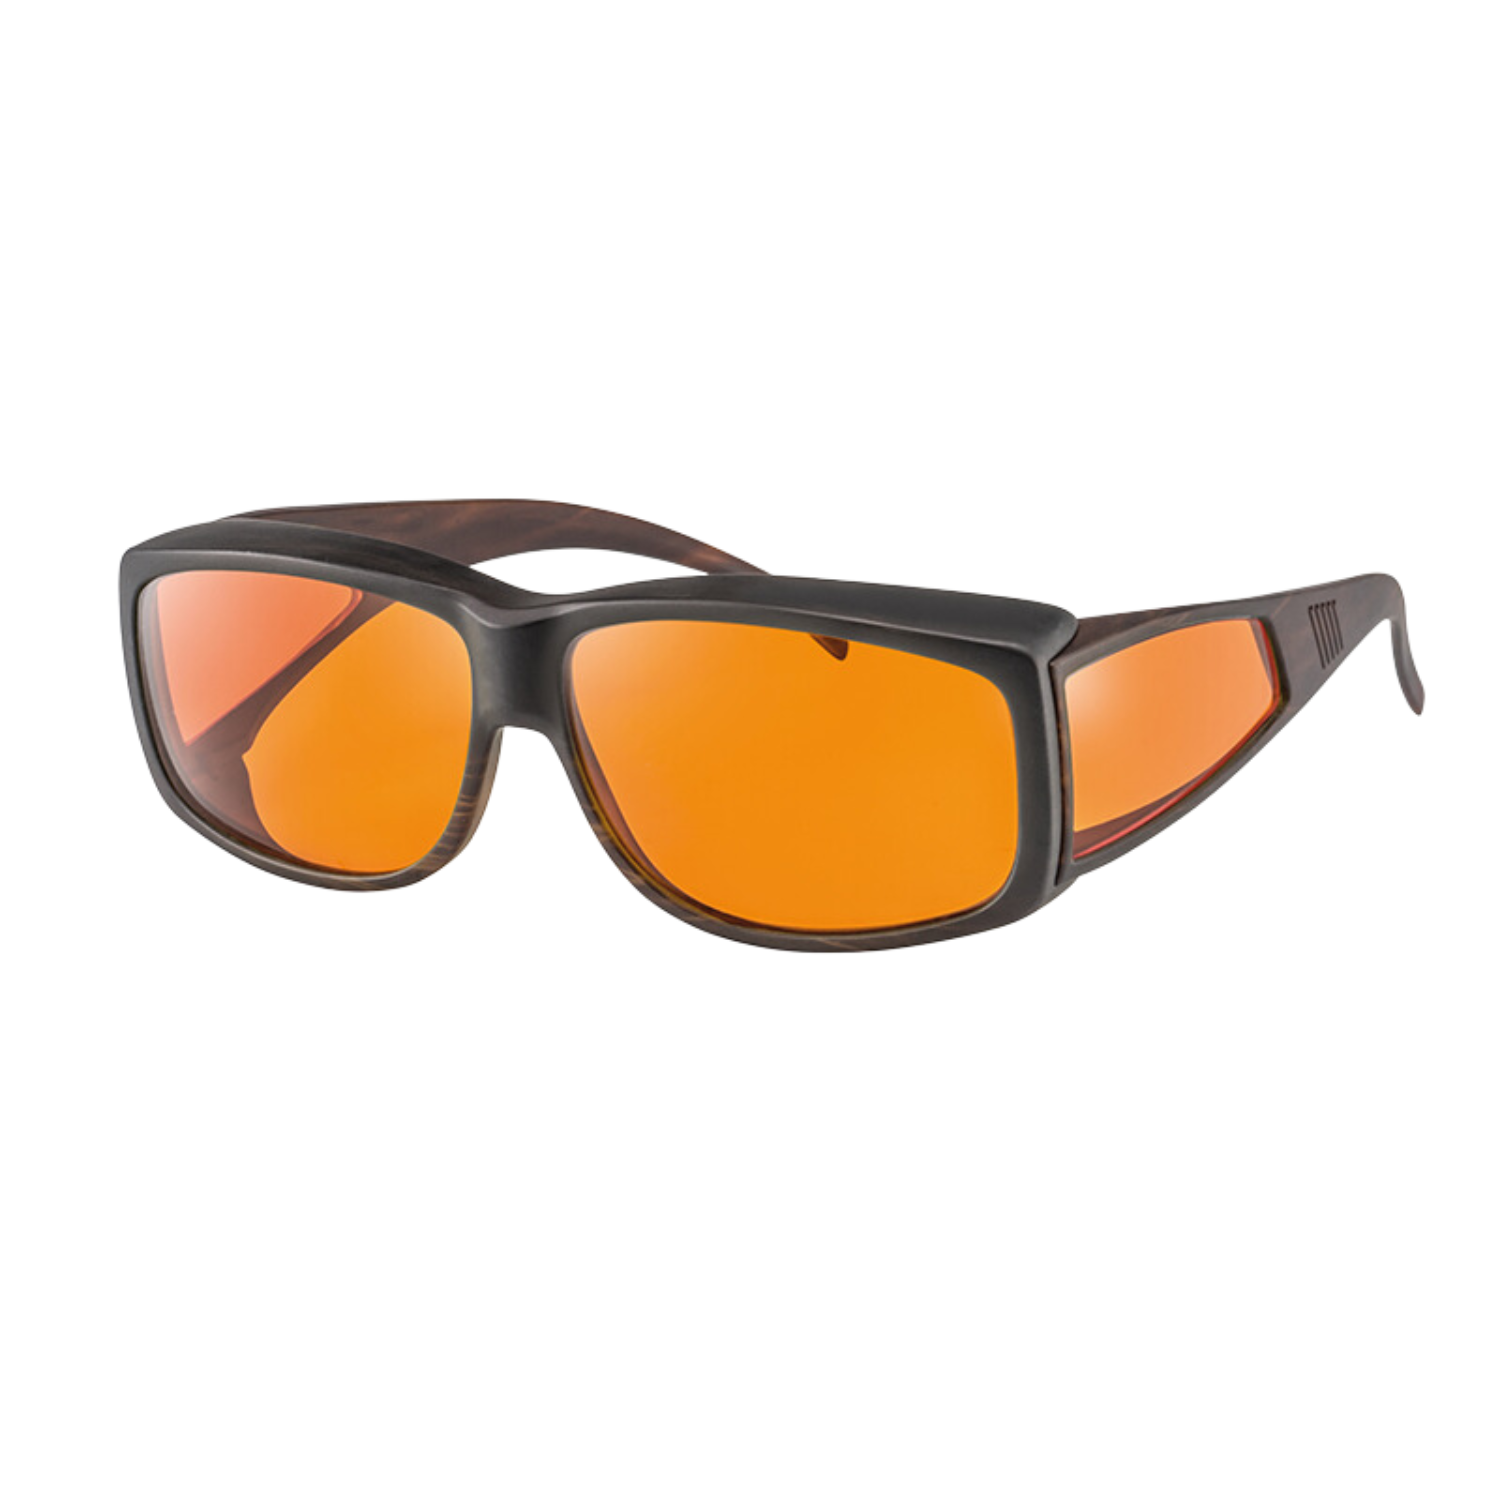 Image of the Asensys XL Blue Light Blocking Glasses with Dark Oragne Tint from Eschenbach.